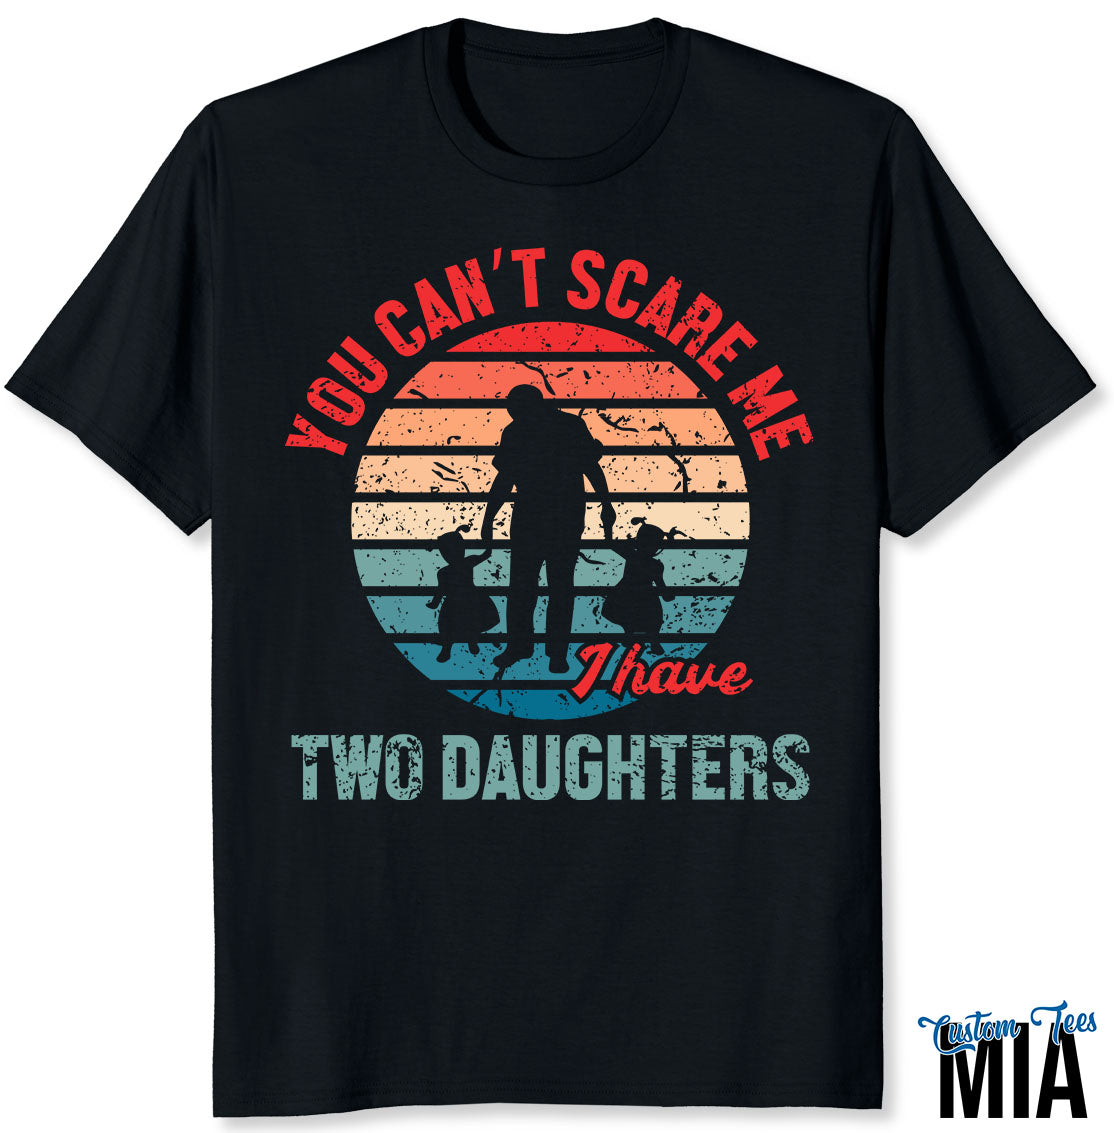 You Can't Scare Me I Have Two Daughters T-shirt